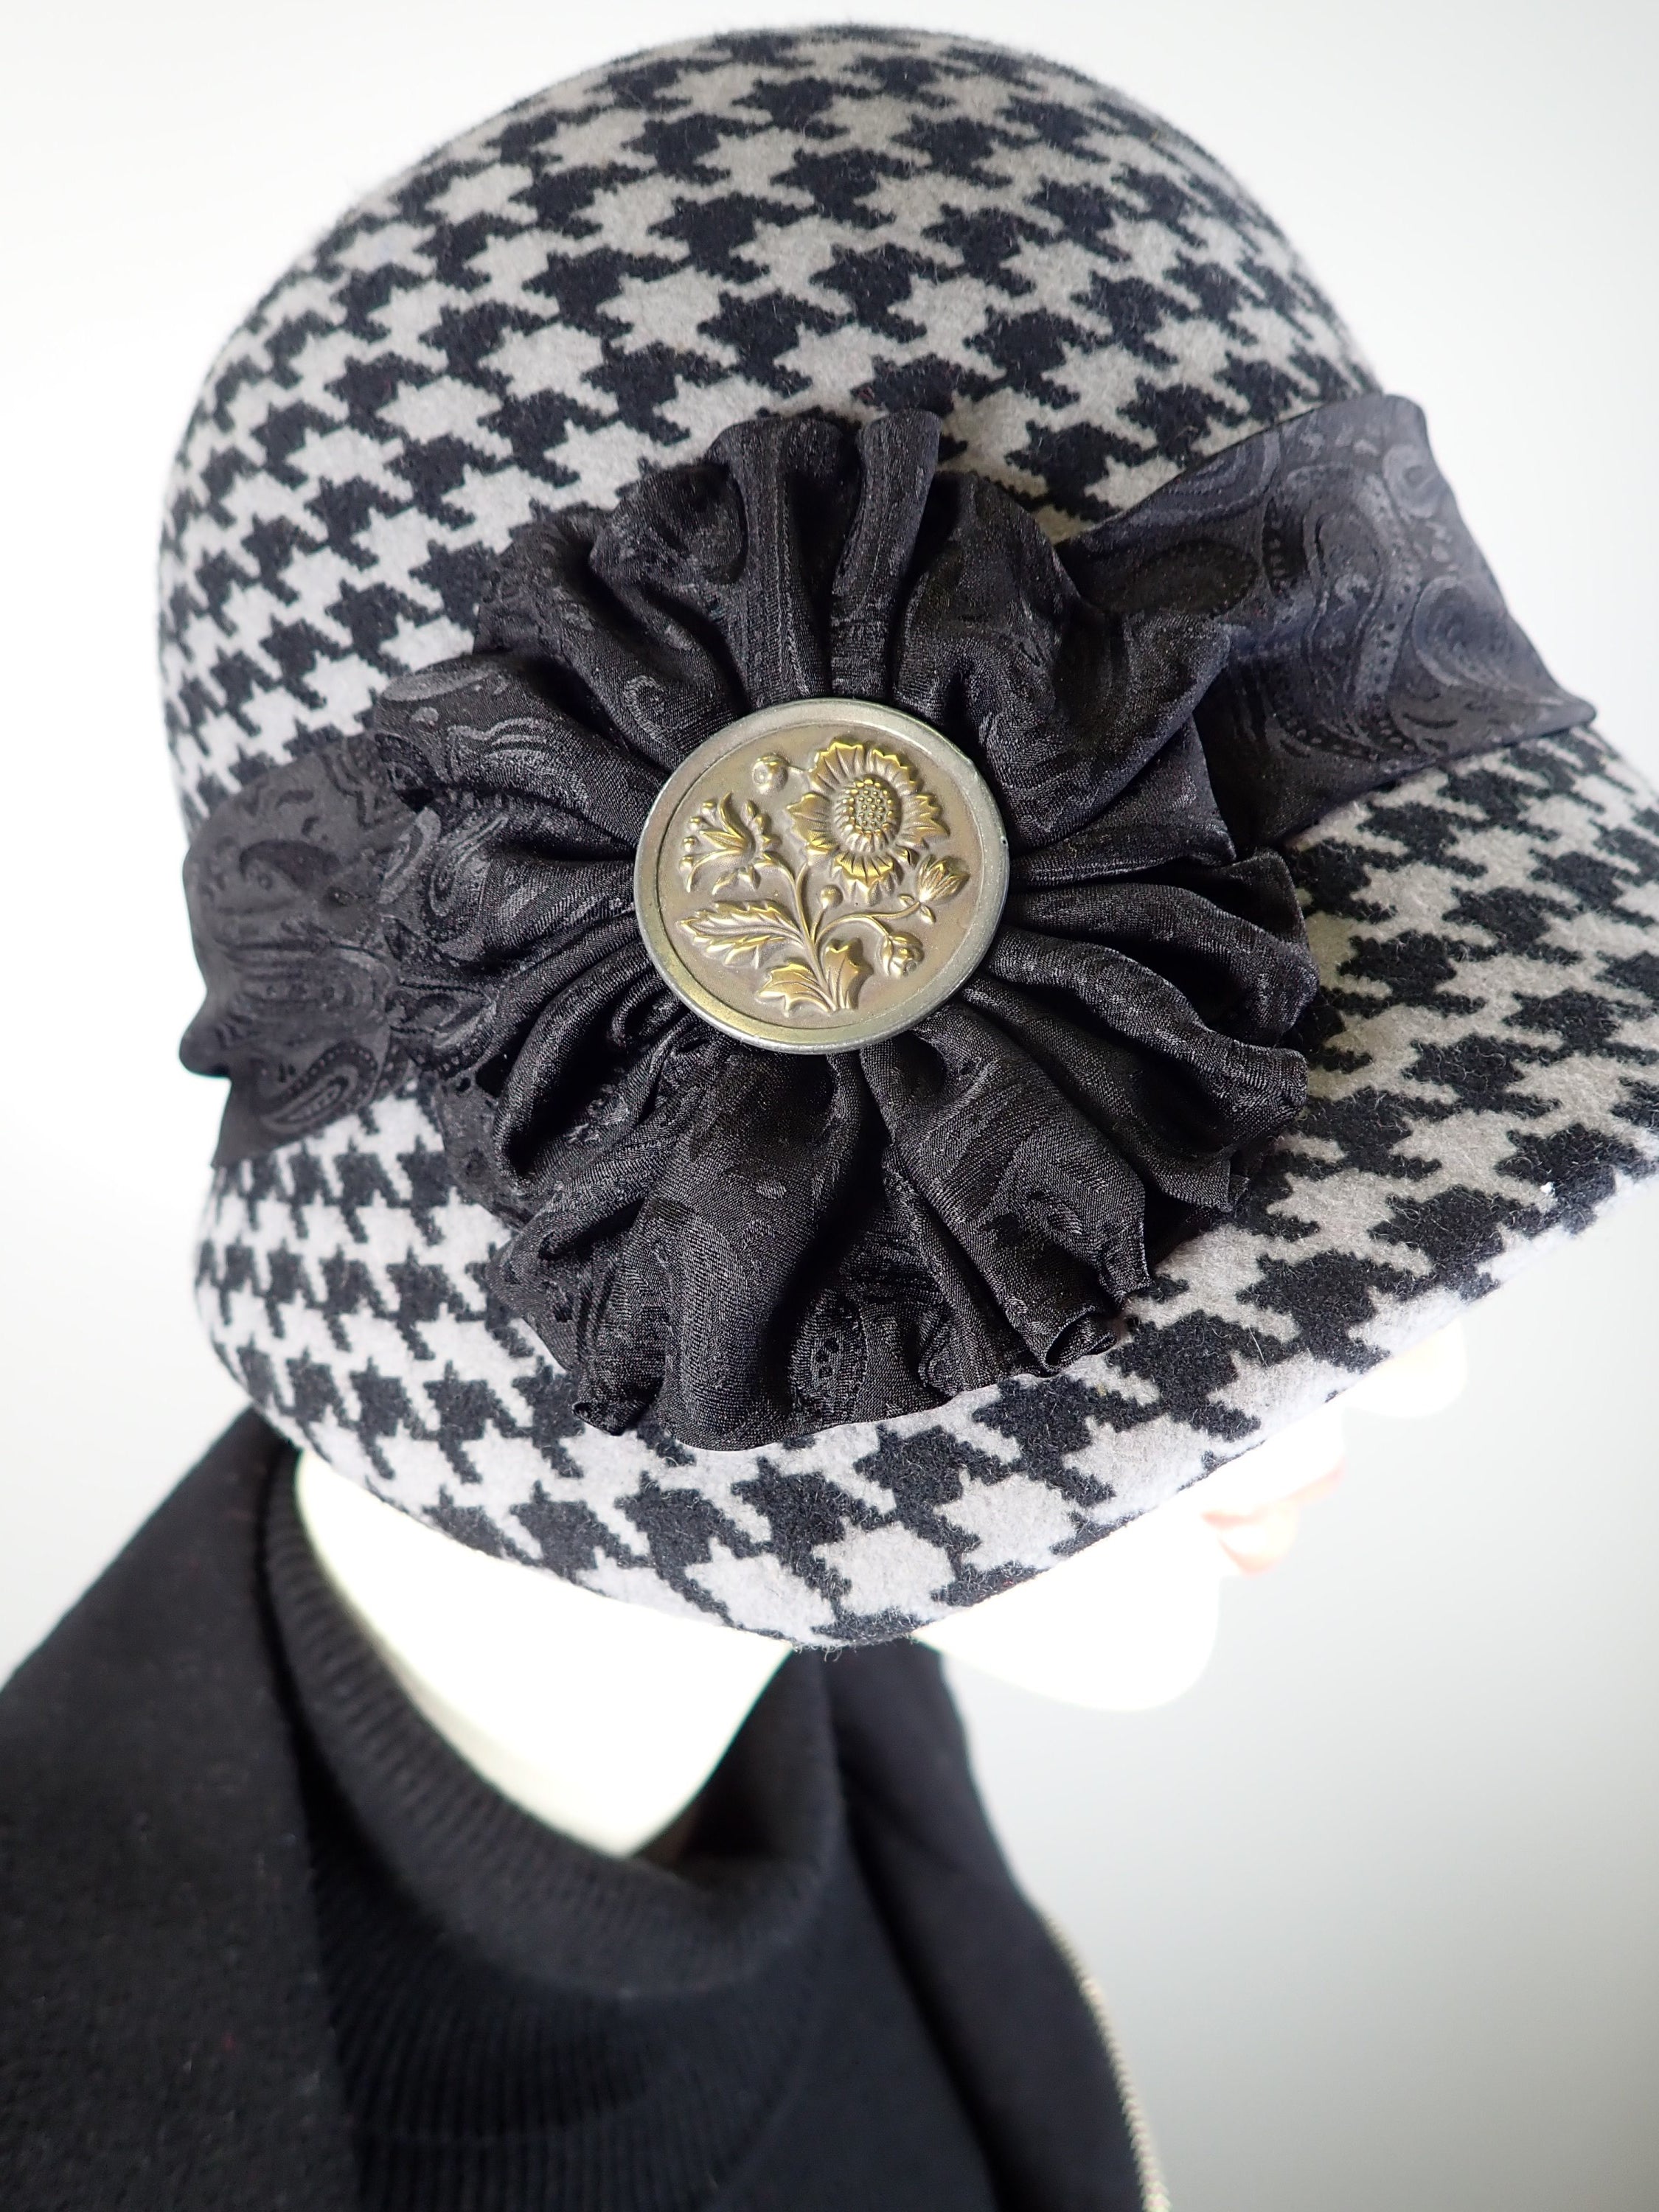 Womens black and gray hounds tooth winter cloche felt hat. 1920s style Hat. Downton Abbey hat. Ladies stylish flapper cloche.